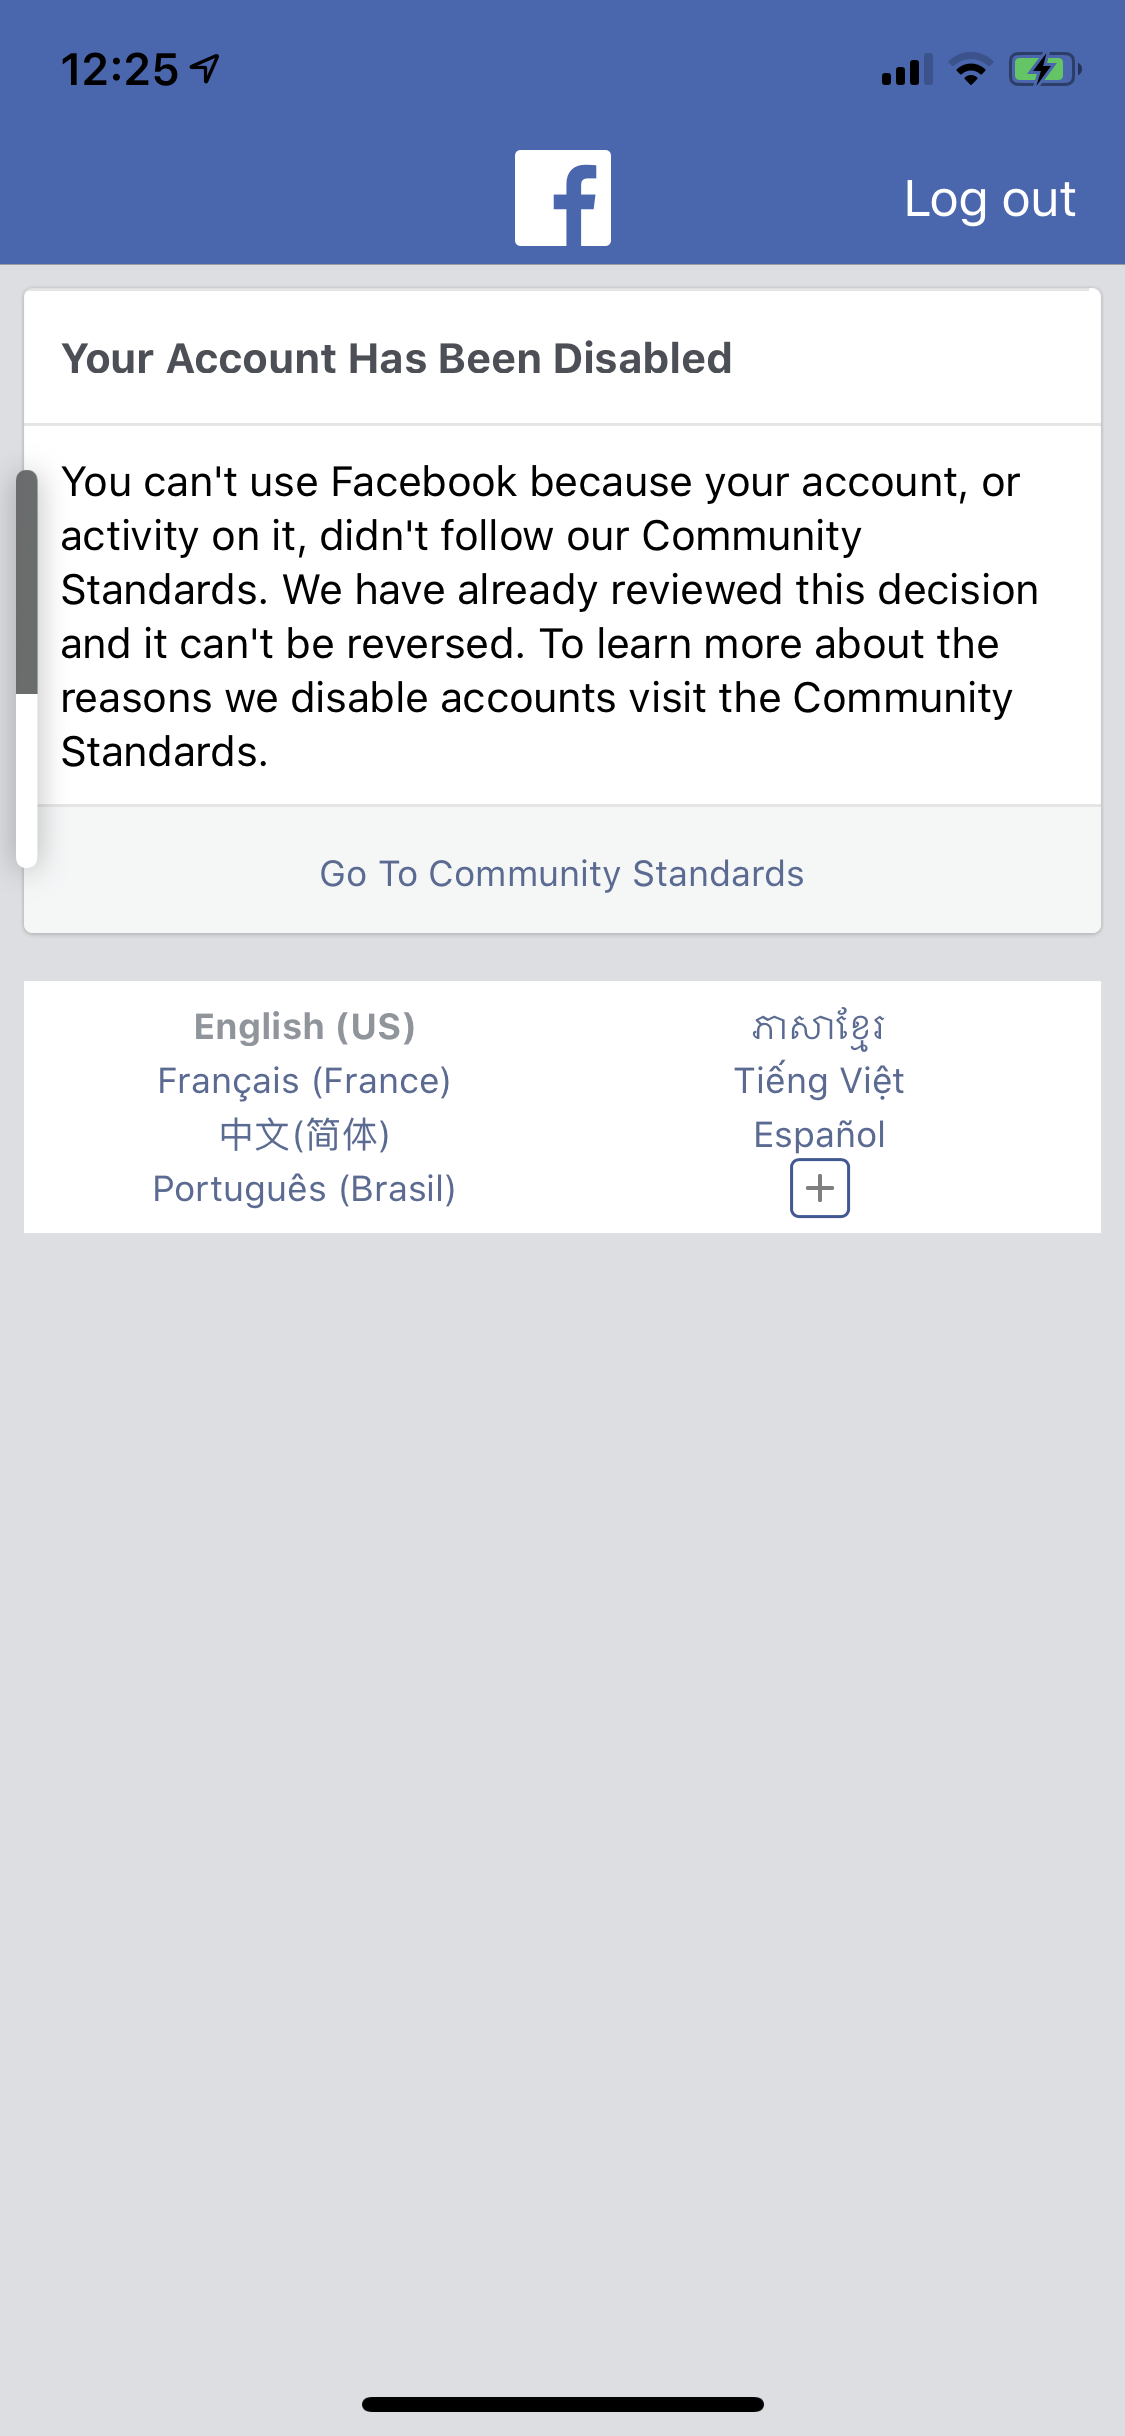 My facebook Account Has Been Disabled - Apple Community